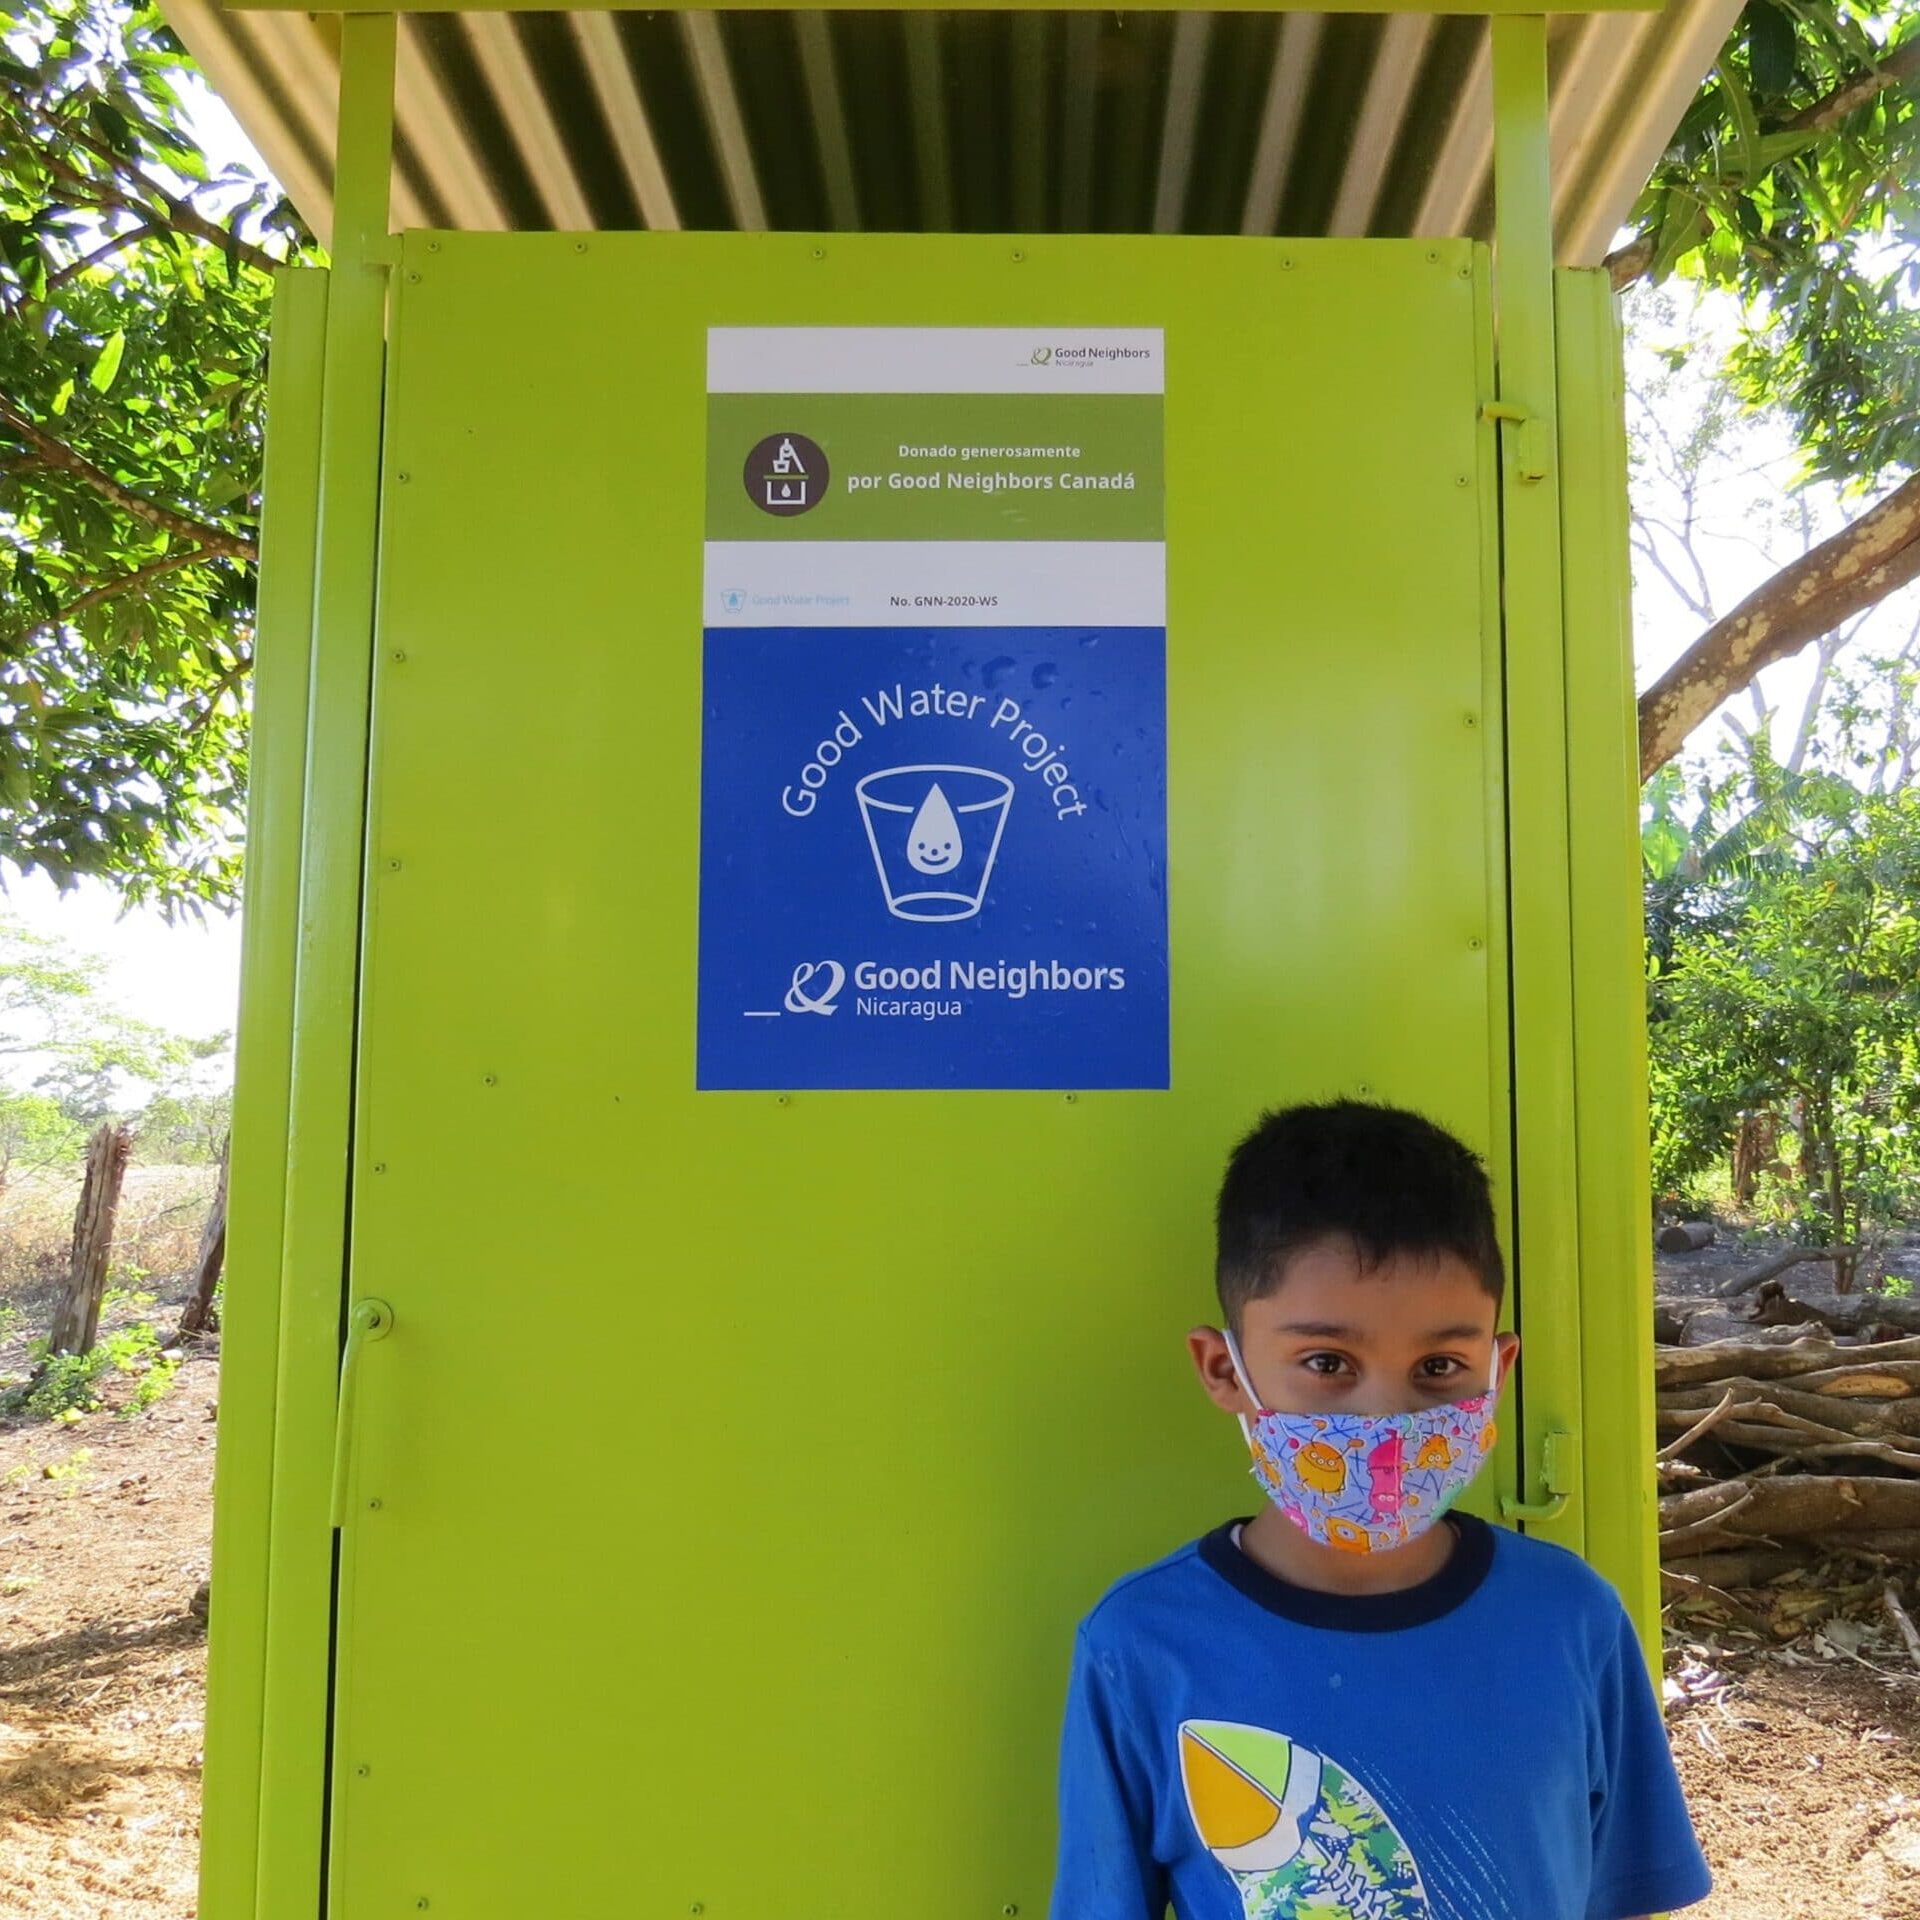 Lino and his family had to use the neighbour's washroom before our project was implemented